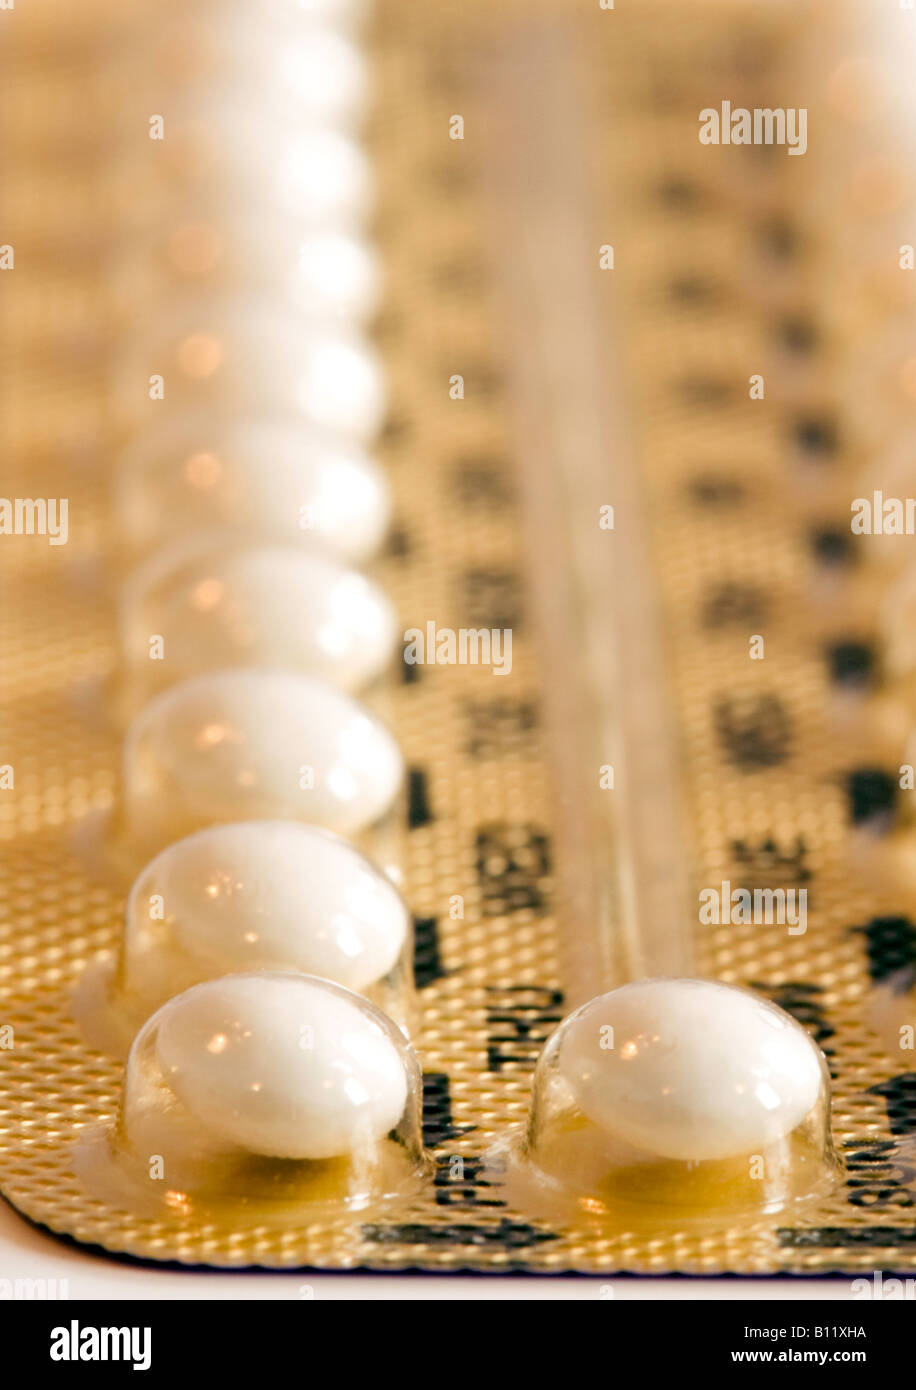 Close up of a pack of Microgynon contraceptive pills for female contraception; UK Stock Photo